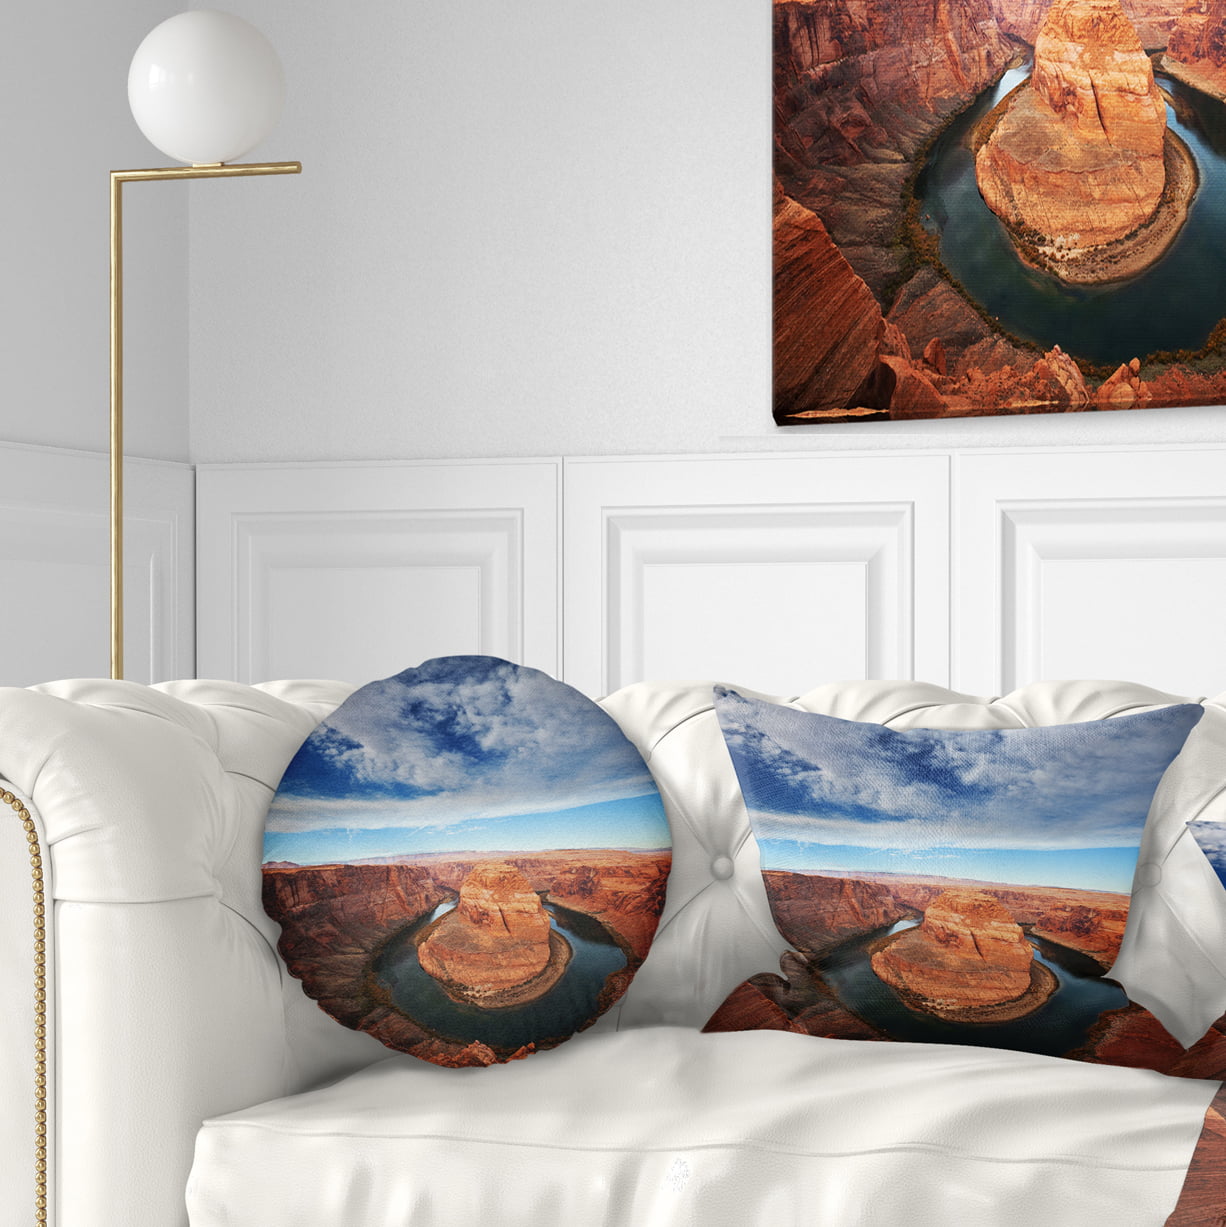 x 20 in Designart CU12305-12-20 Horse Shoe Bend Under Midday Sun Landscape Printed Lumbar Cushion Cover for Living Room Sofa Throw Pillow 12 in in Insert Side